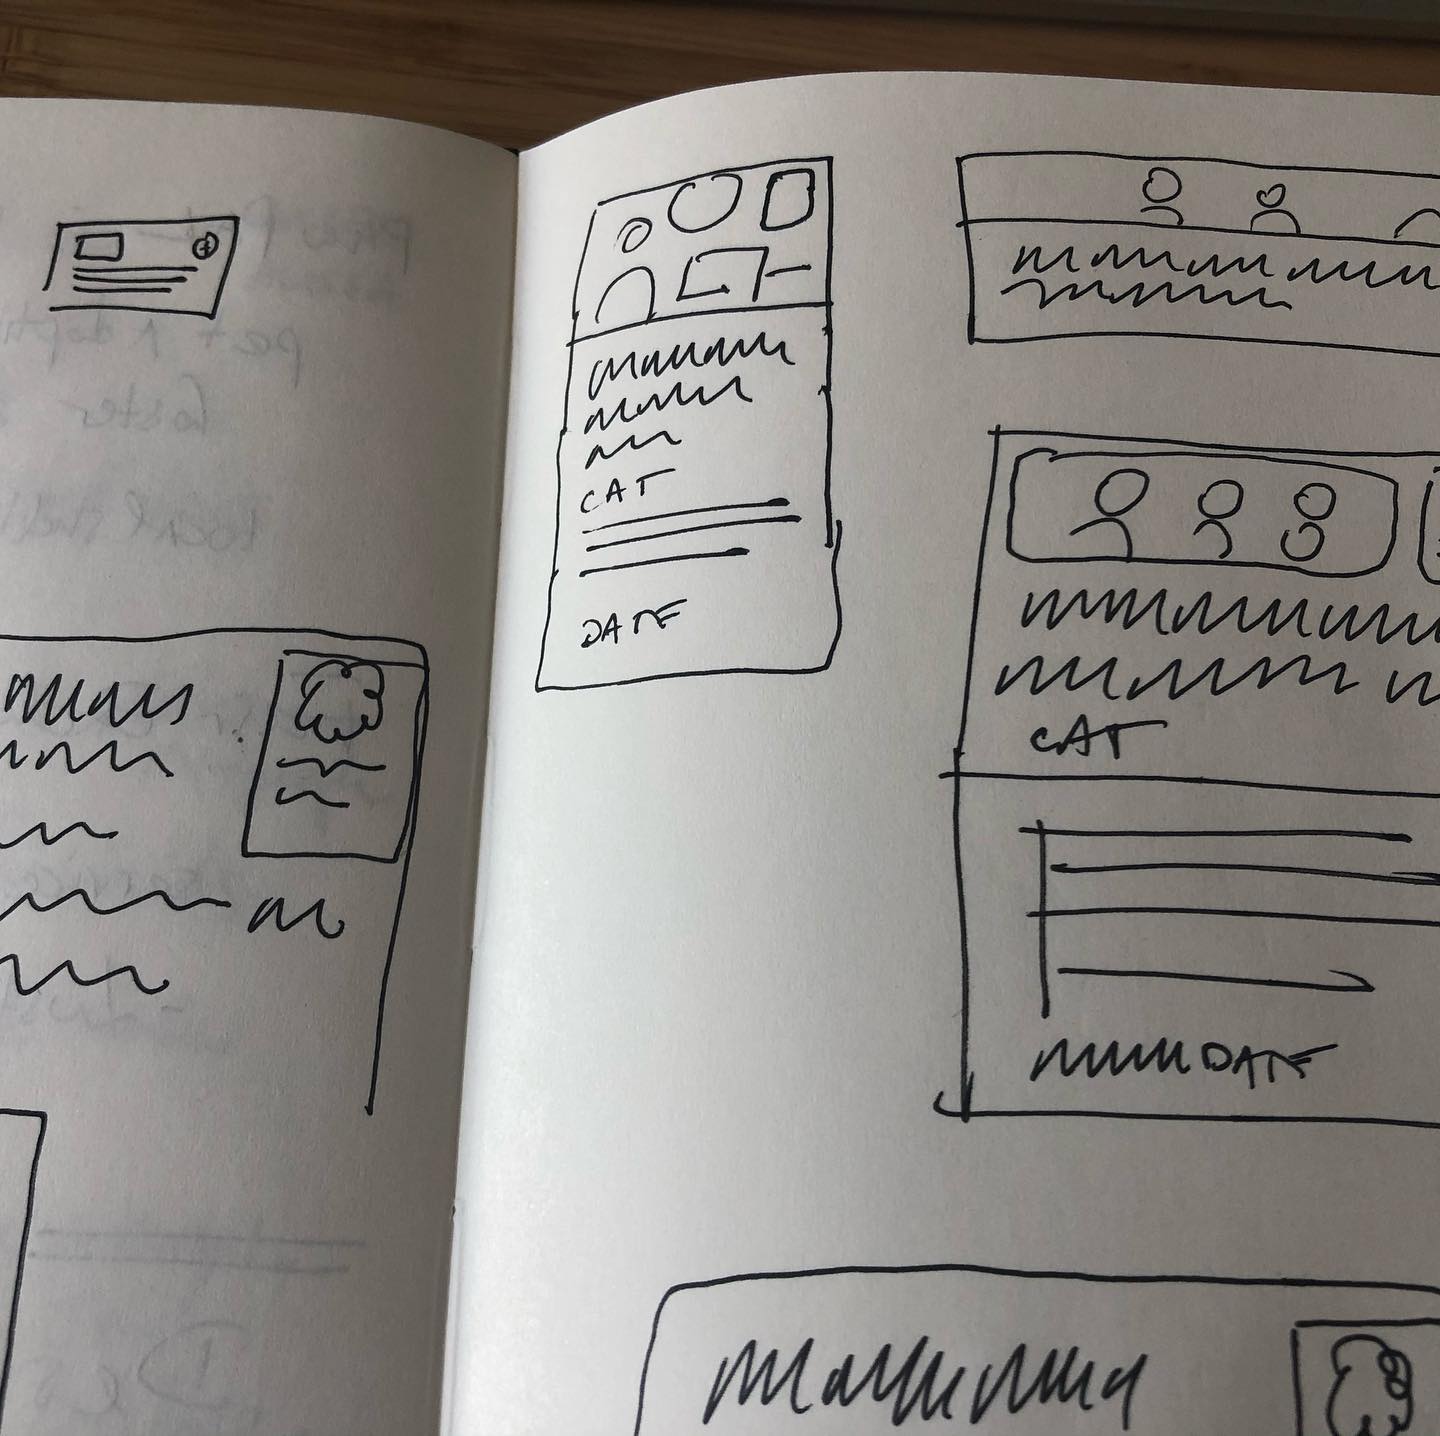 20+ years designing and I still work ideas out on paper. Product, service, or system—don’t skip the first steps.